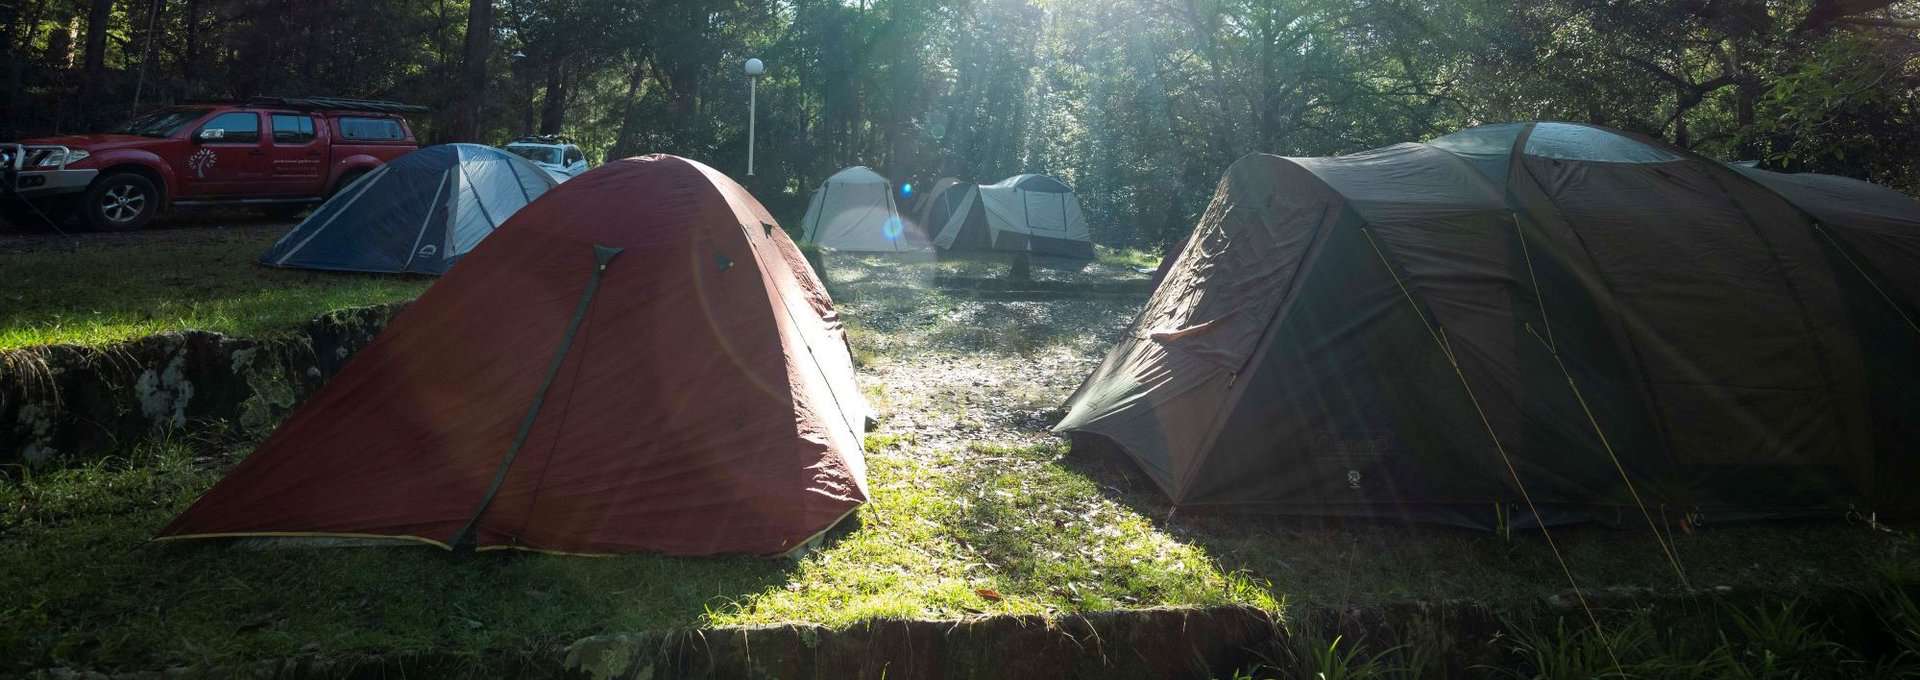 Overnight Camps